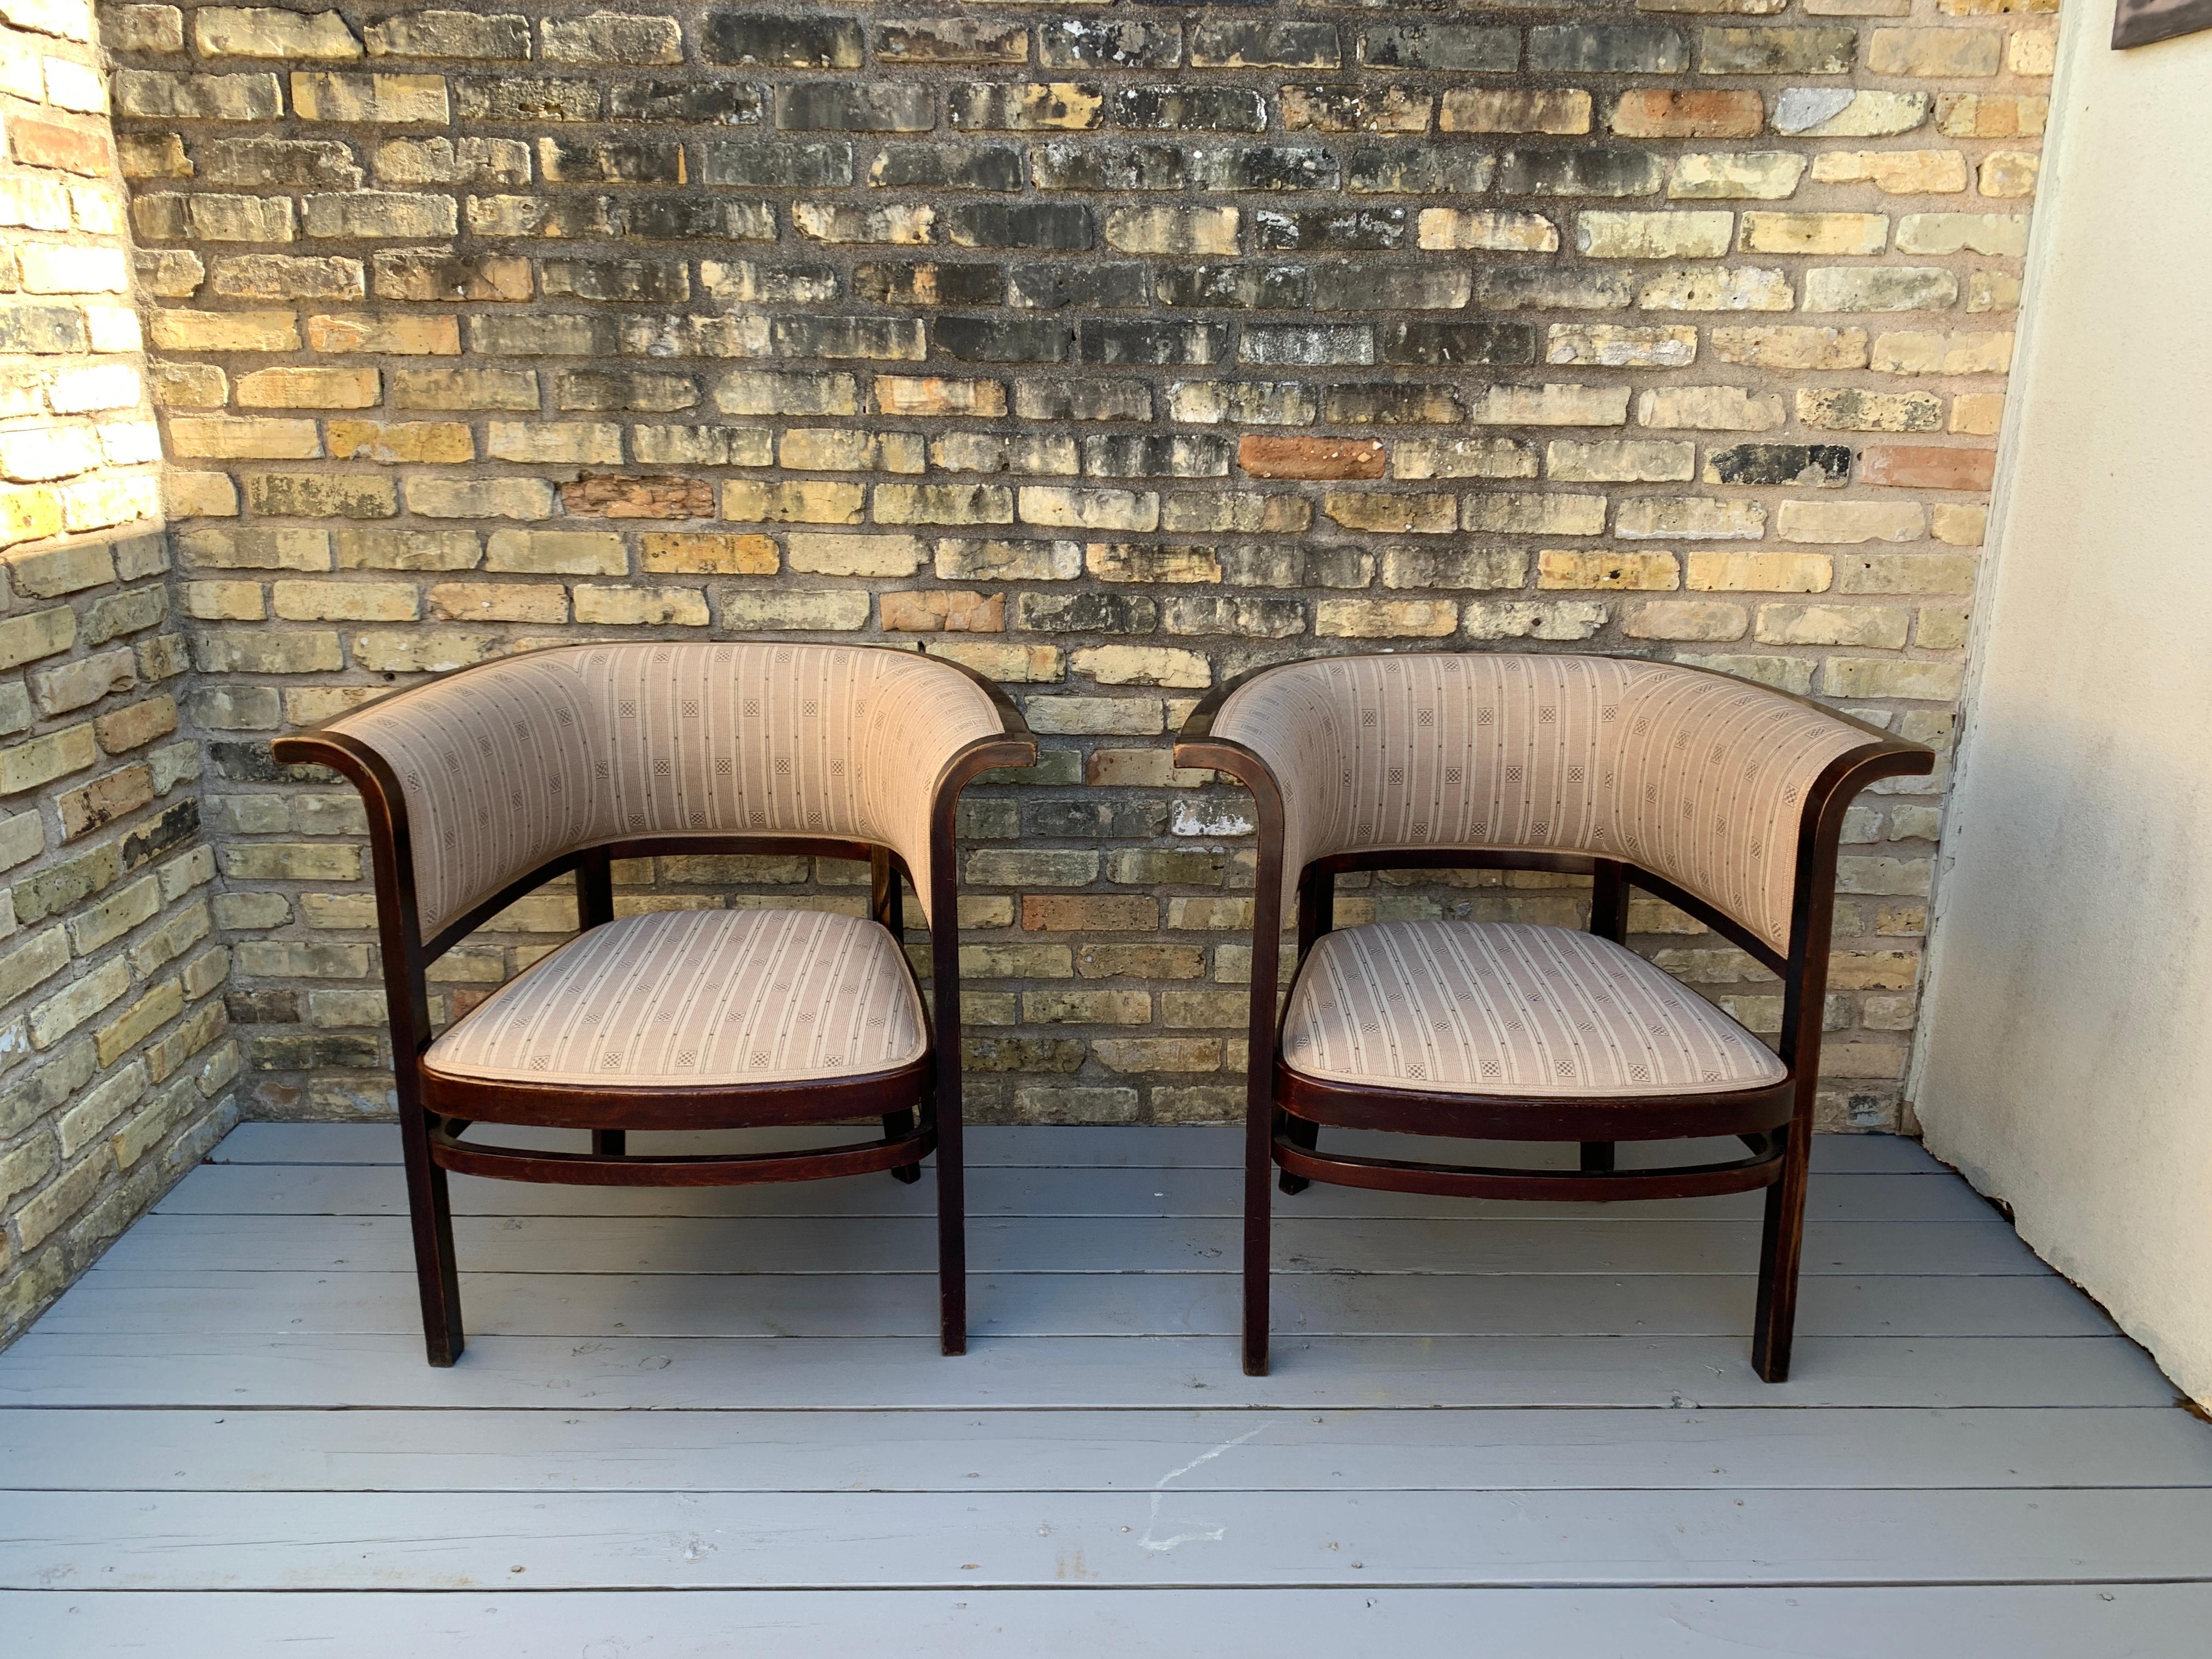 A wonderful pair of Vienna Secession stained and bent beechwood chairs, model no. 6534, designed by Marcel Kammerer and manufactured by Thonet, Vienna, Austria, circa 1910.

With beautiful lines, a wonderful sense of proportion, and just a hint of